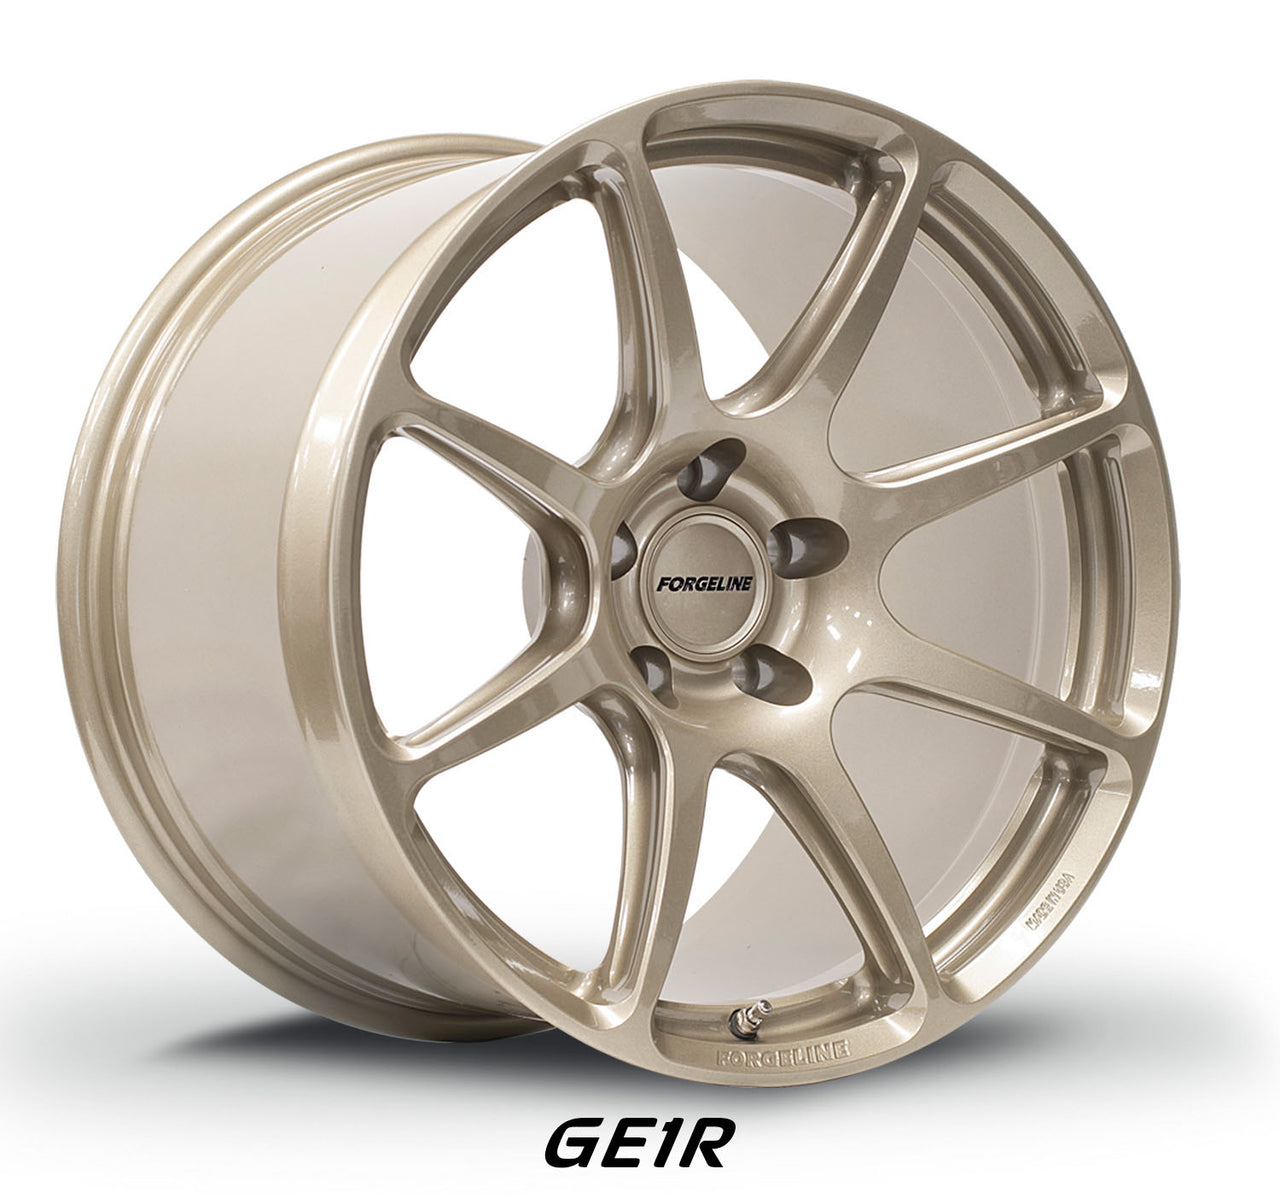 Hampton Gold Forgeline GE1R forged motorsports wheel for Porsche Cayman GT4 the best for track days and HPDE events